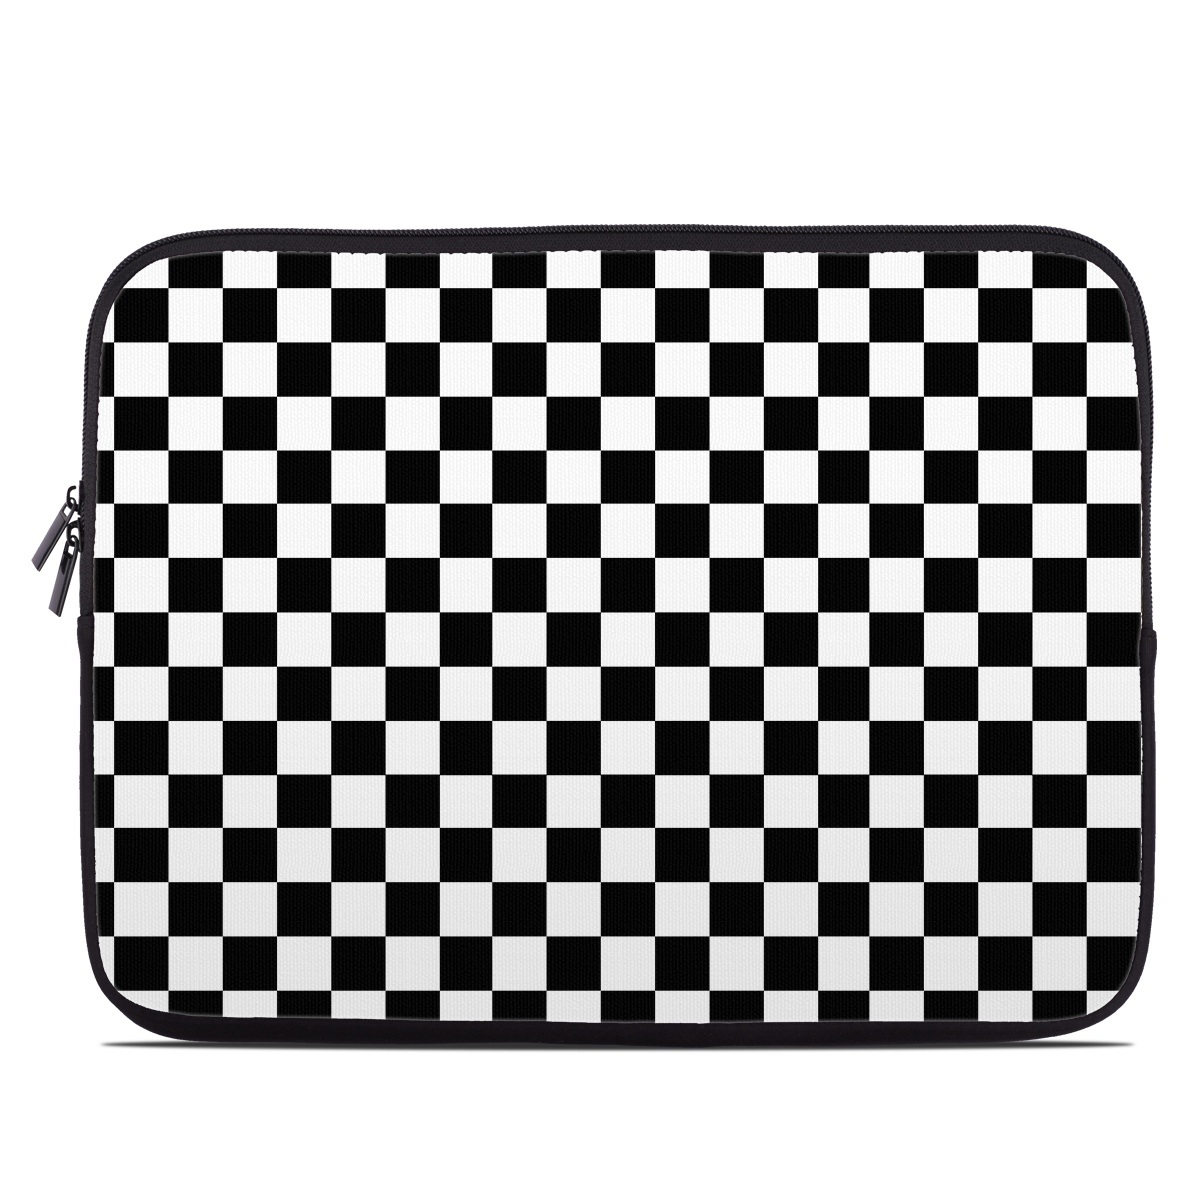 Laptop Sleeve - Checkers (Image 1)